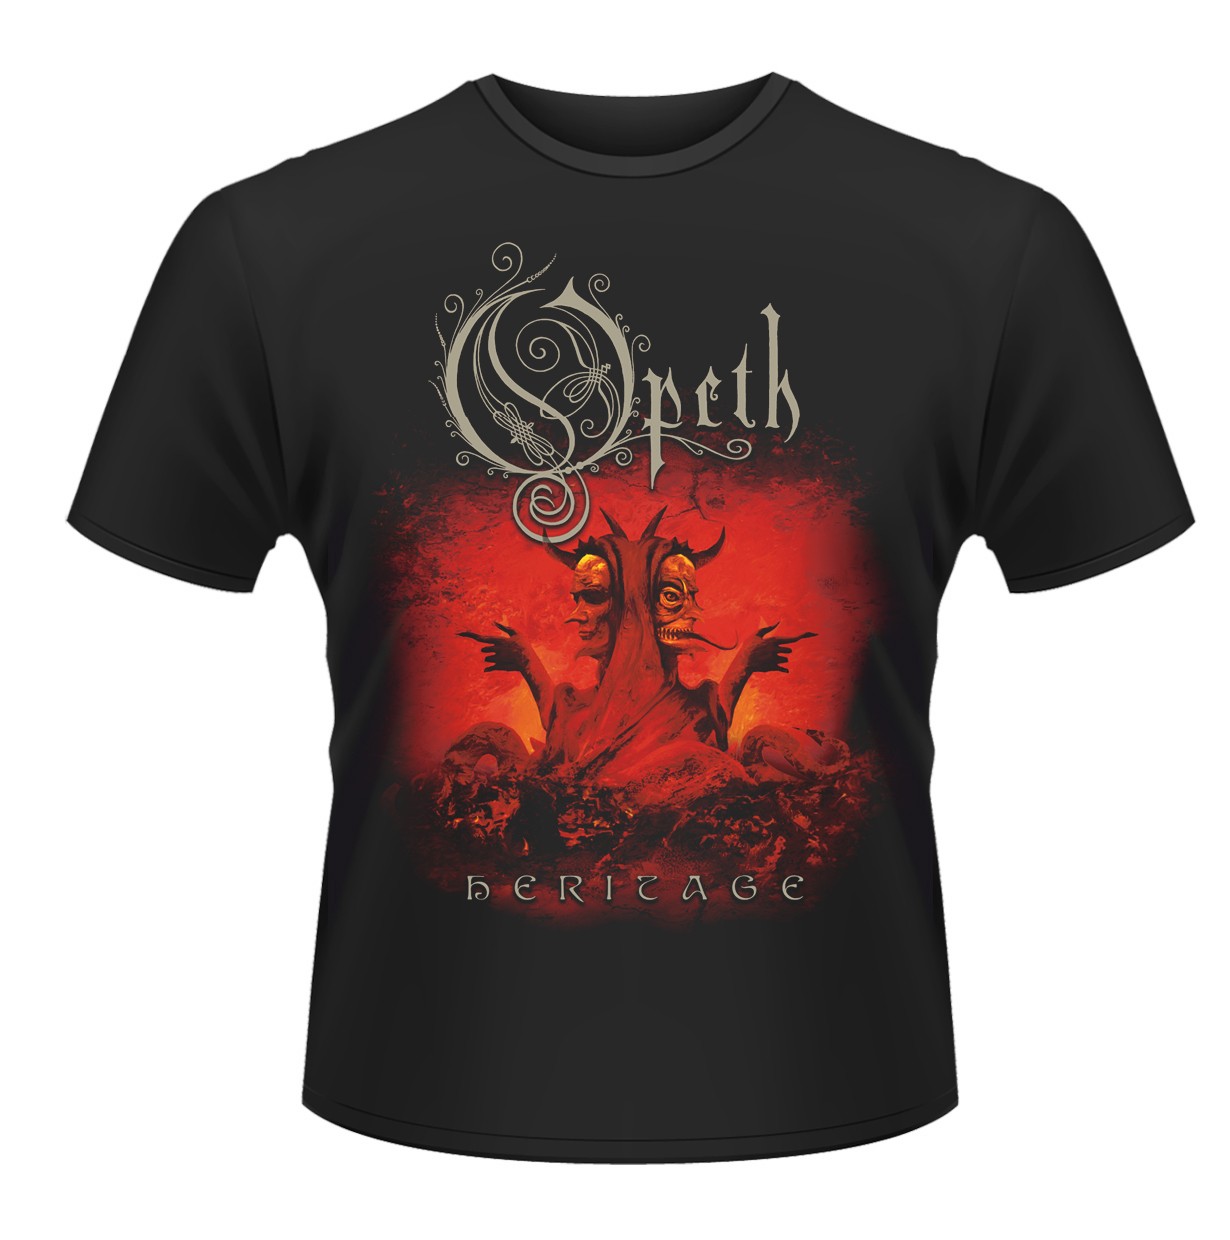 Opeth 'Heritage' T-Shirt - NEW & OFFICIAL! | eBay